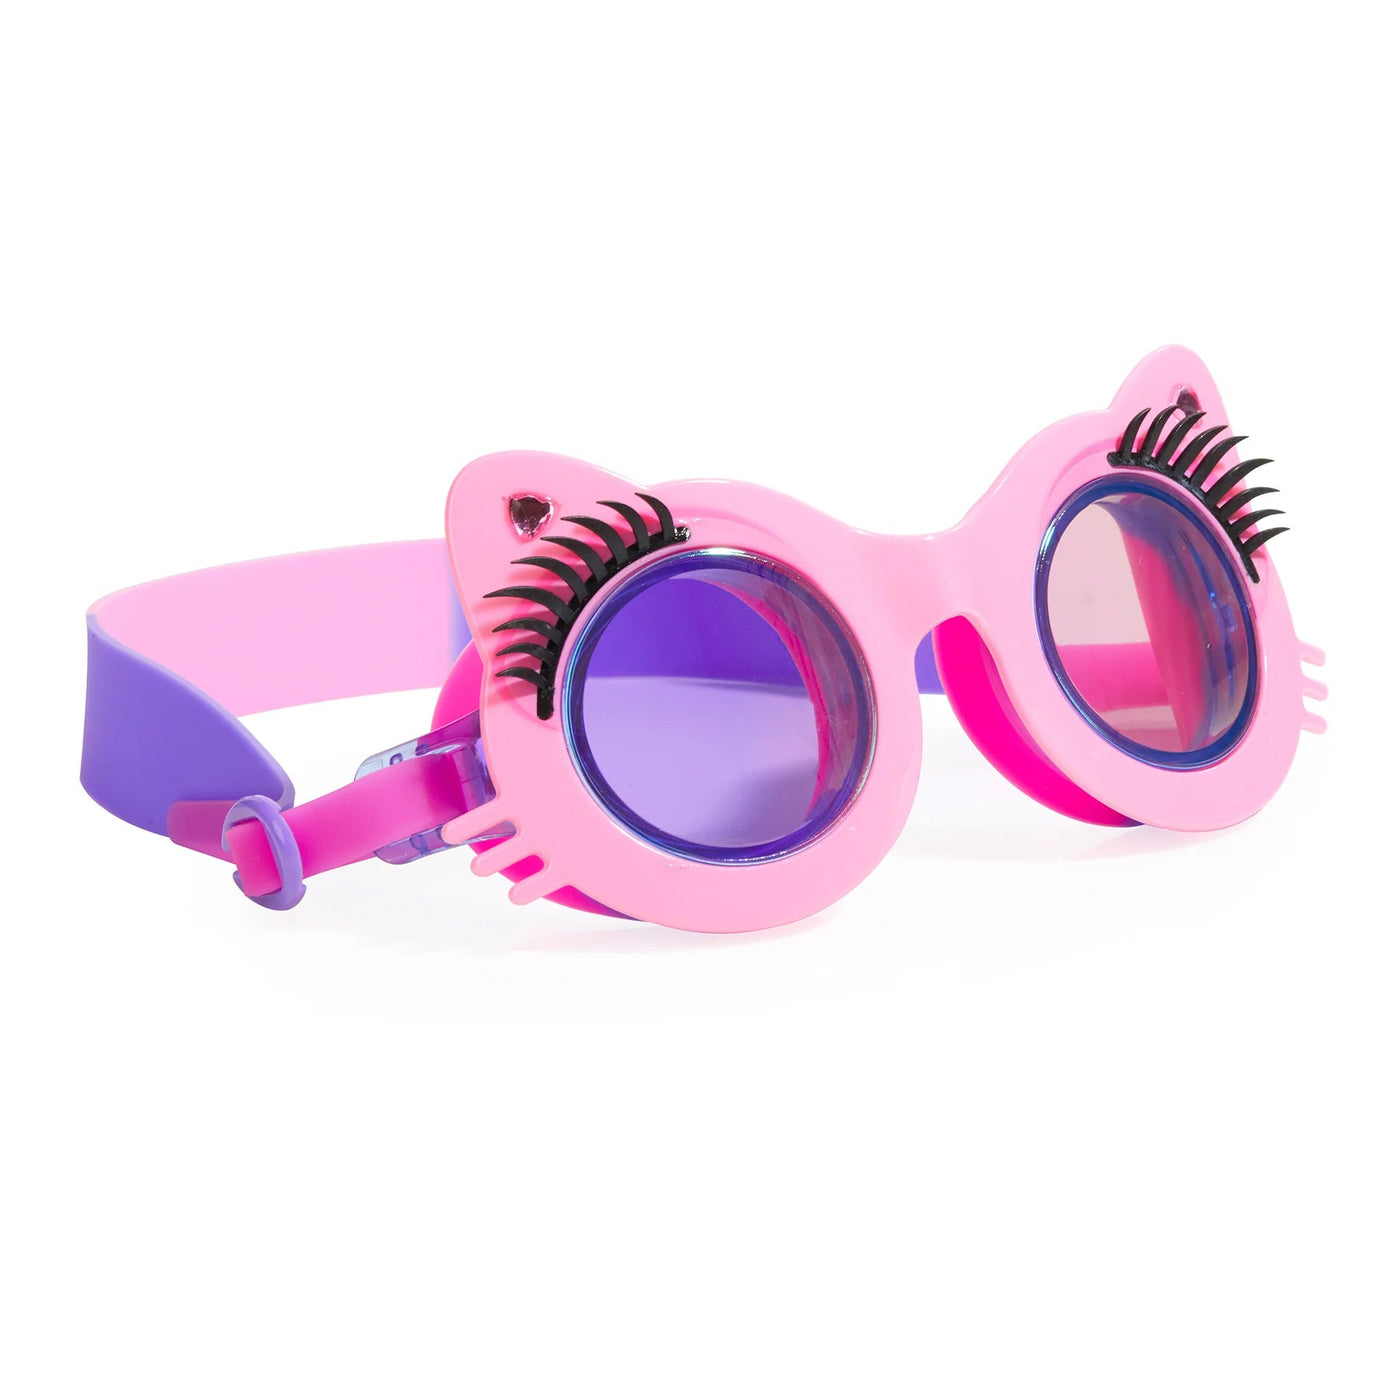 Bling2o Pawdry Hepburn - Pink'N'Boots Goggles Bling2o 